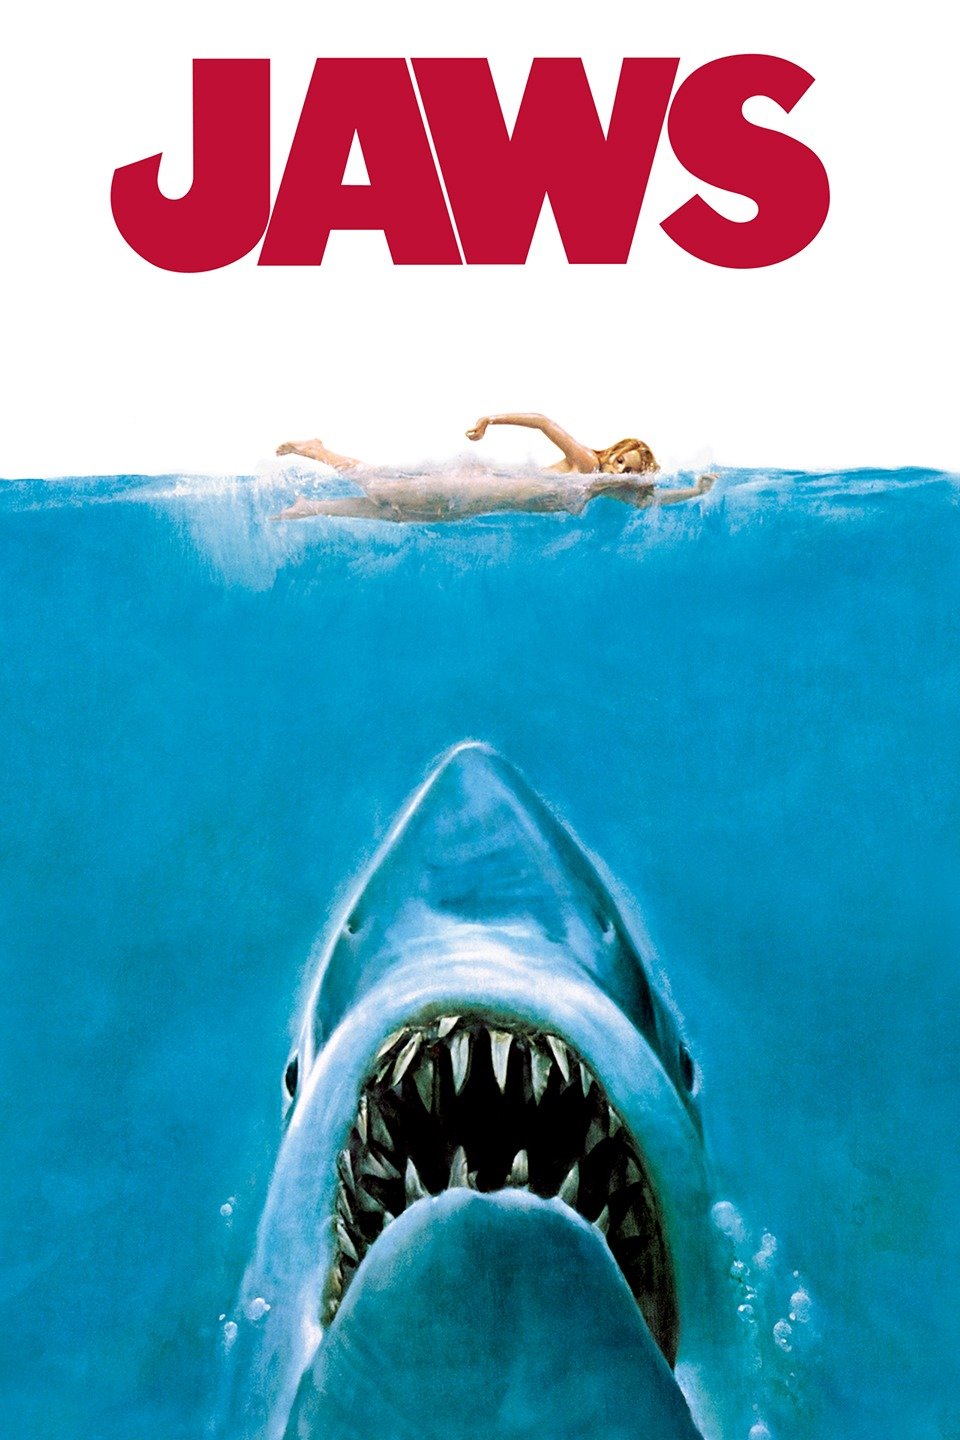 Jaws - Top 25 Horror Movies of All Time